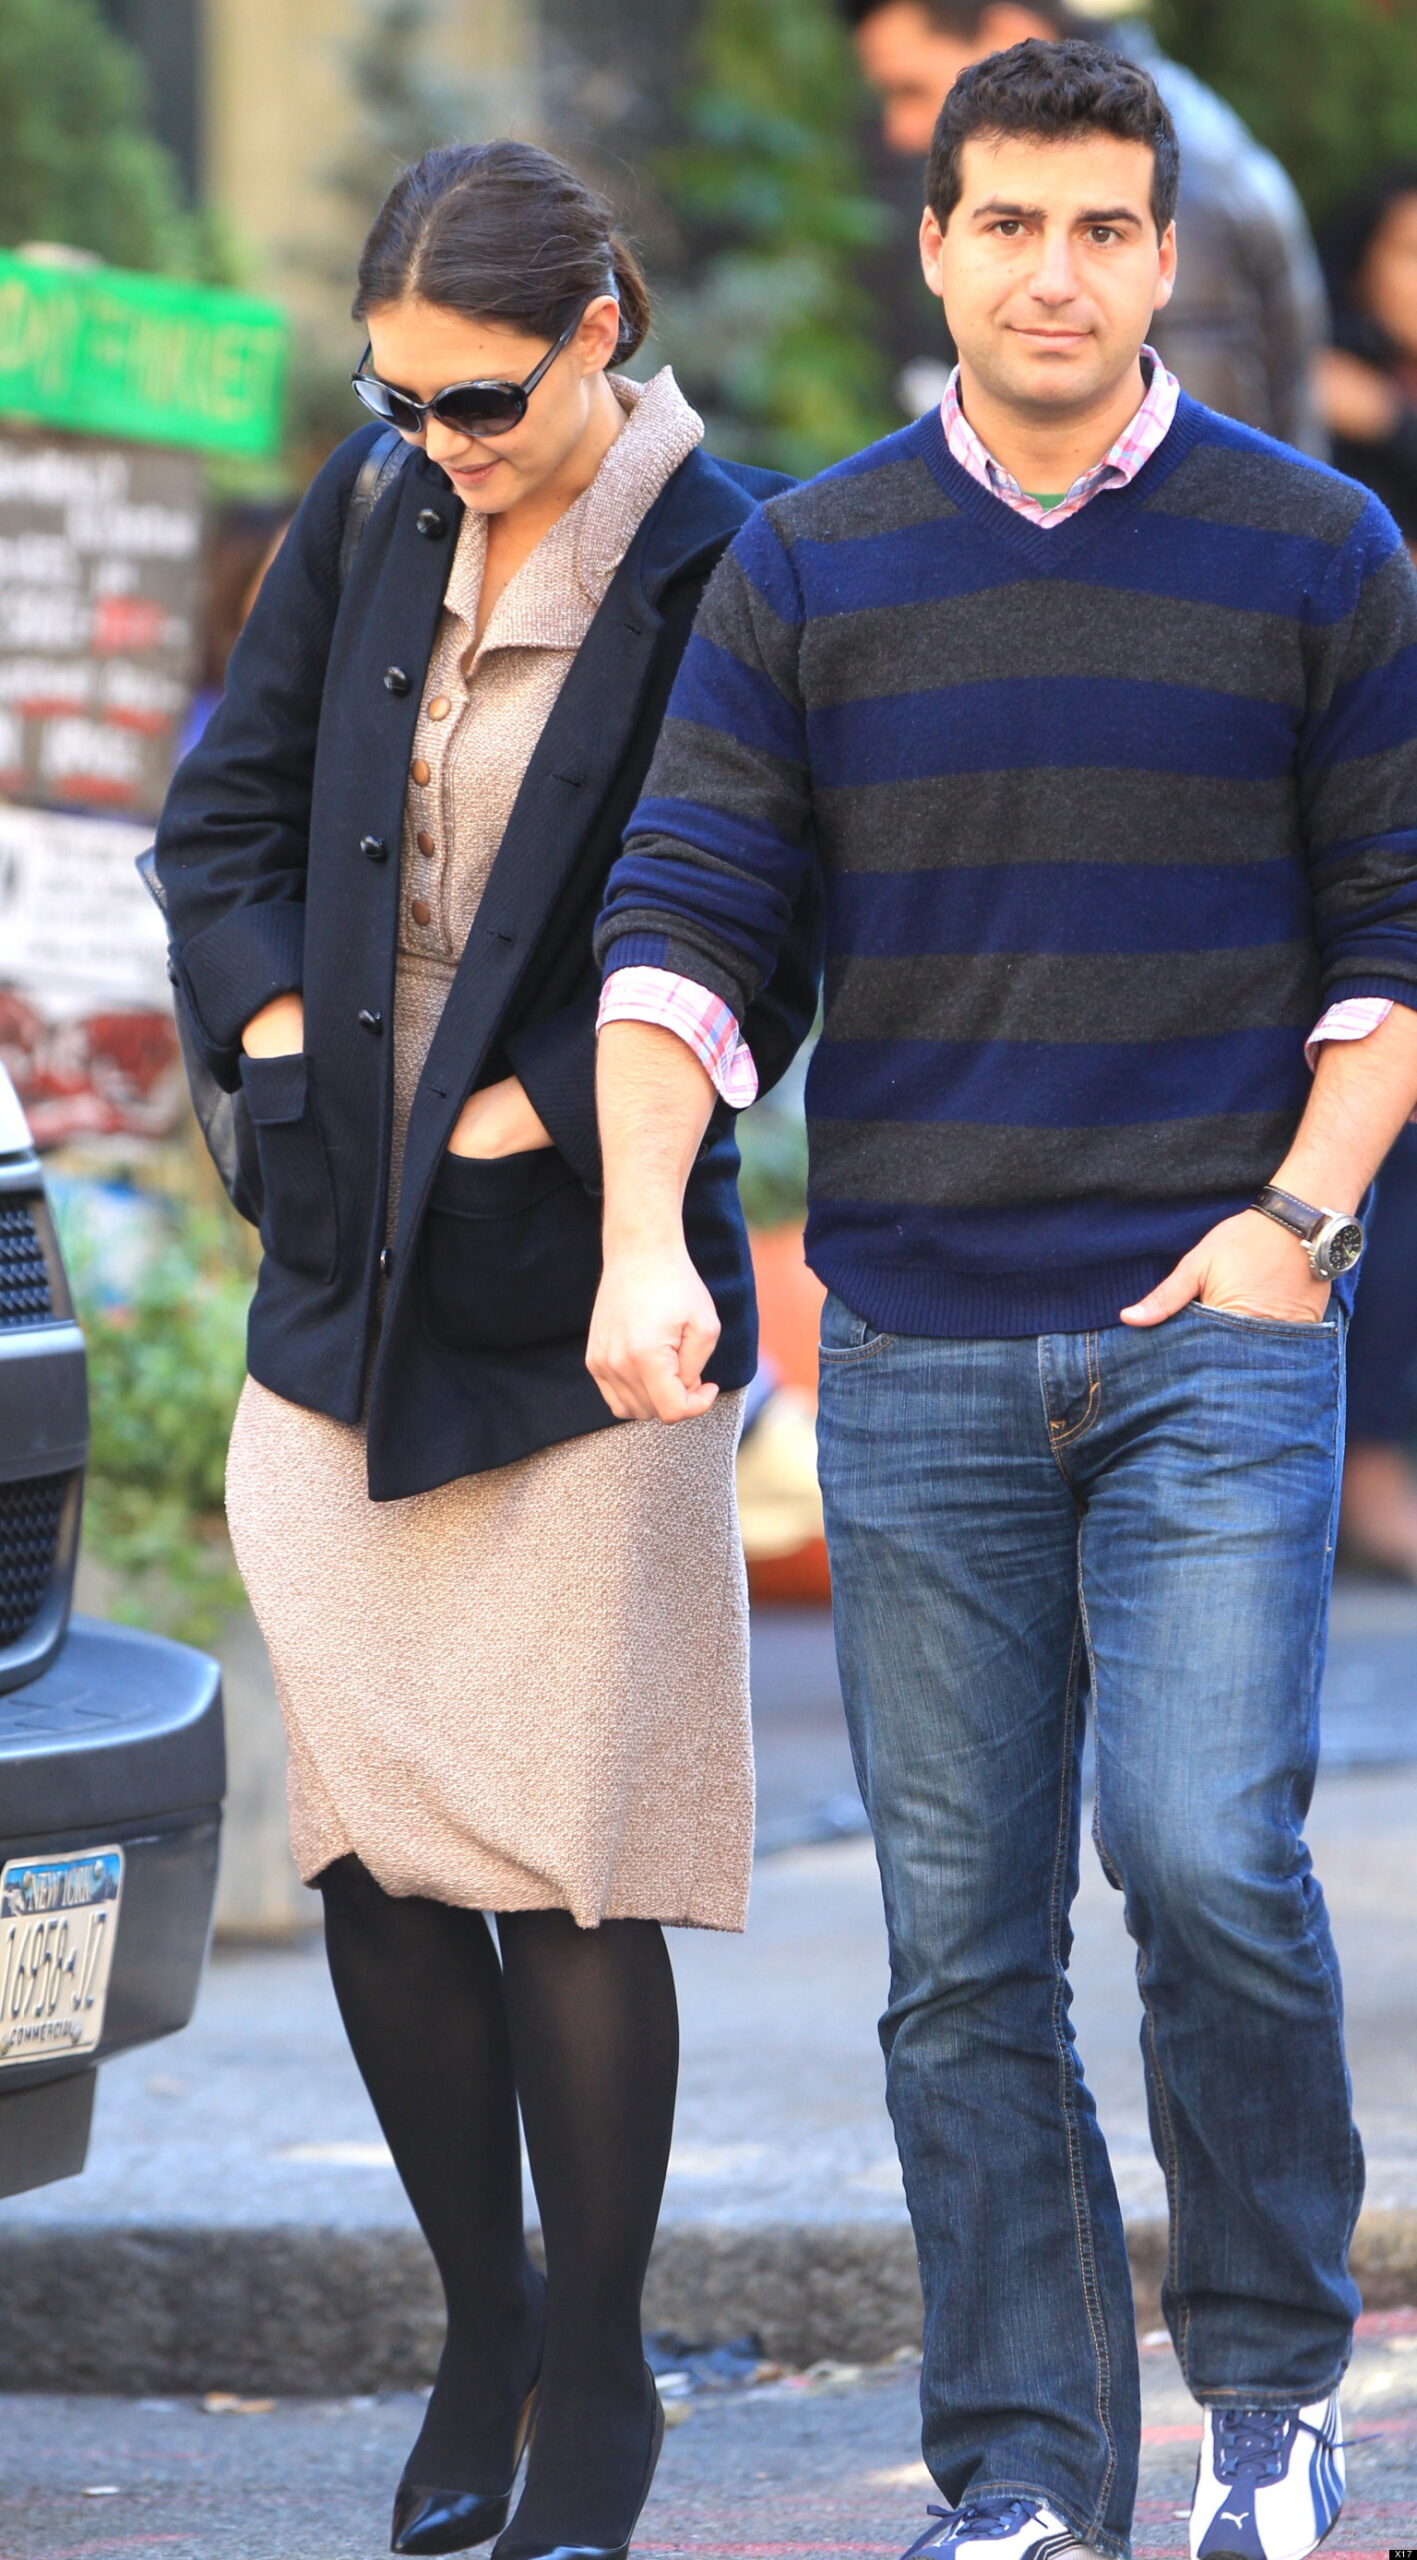 katie-holmes-out-and-about-in-new-york-city-with-a-mysterious-man